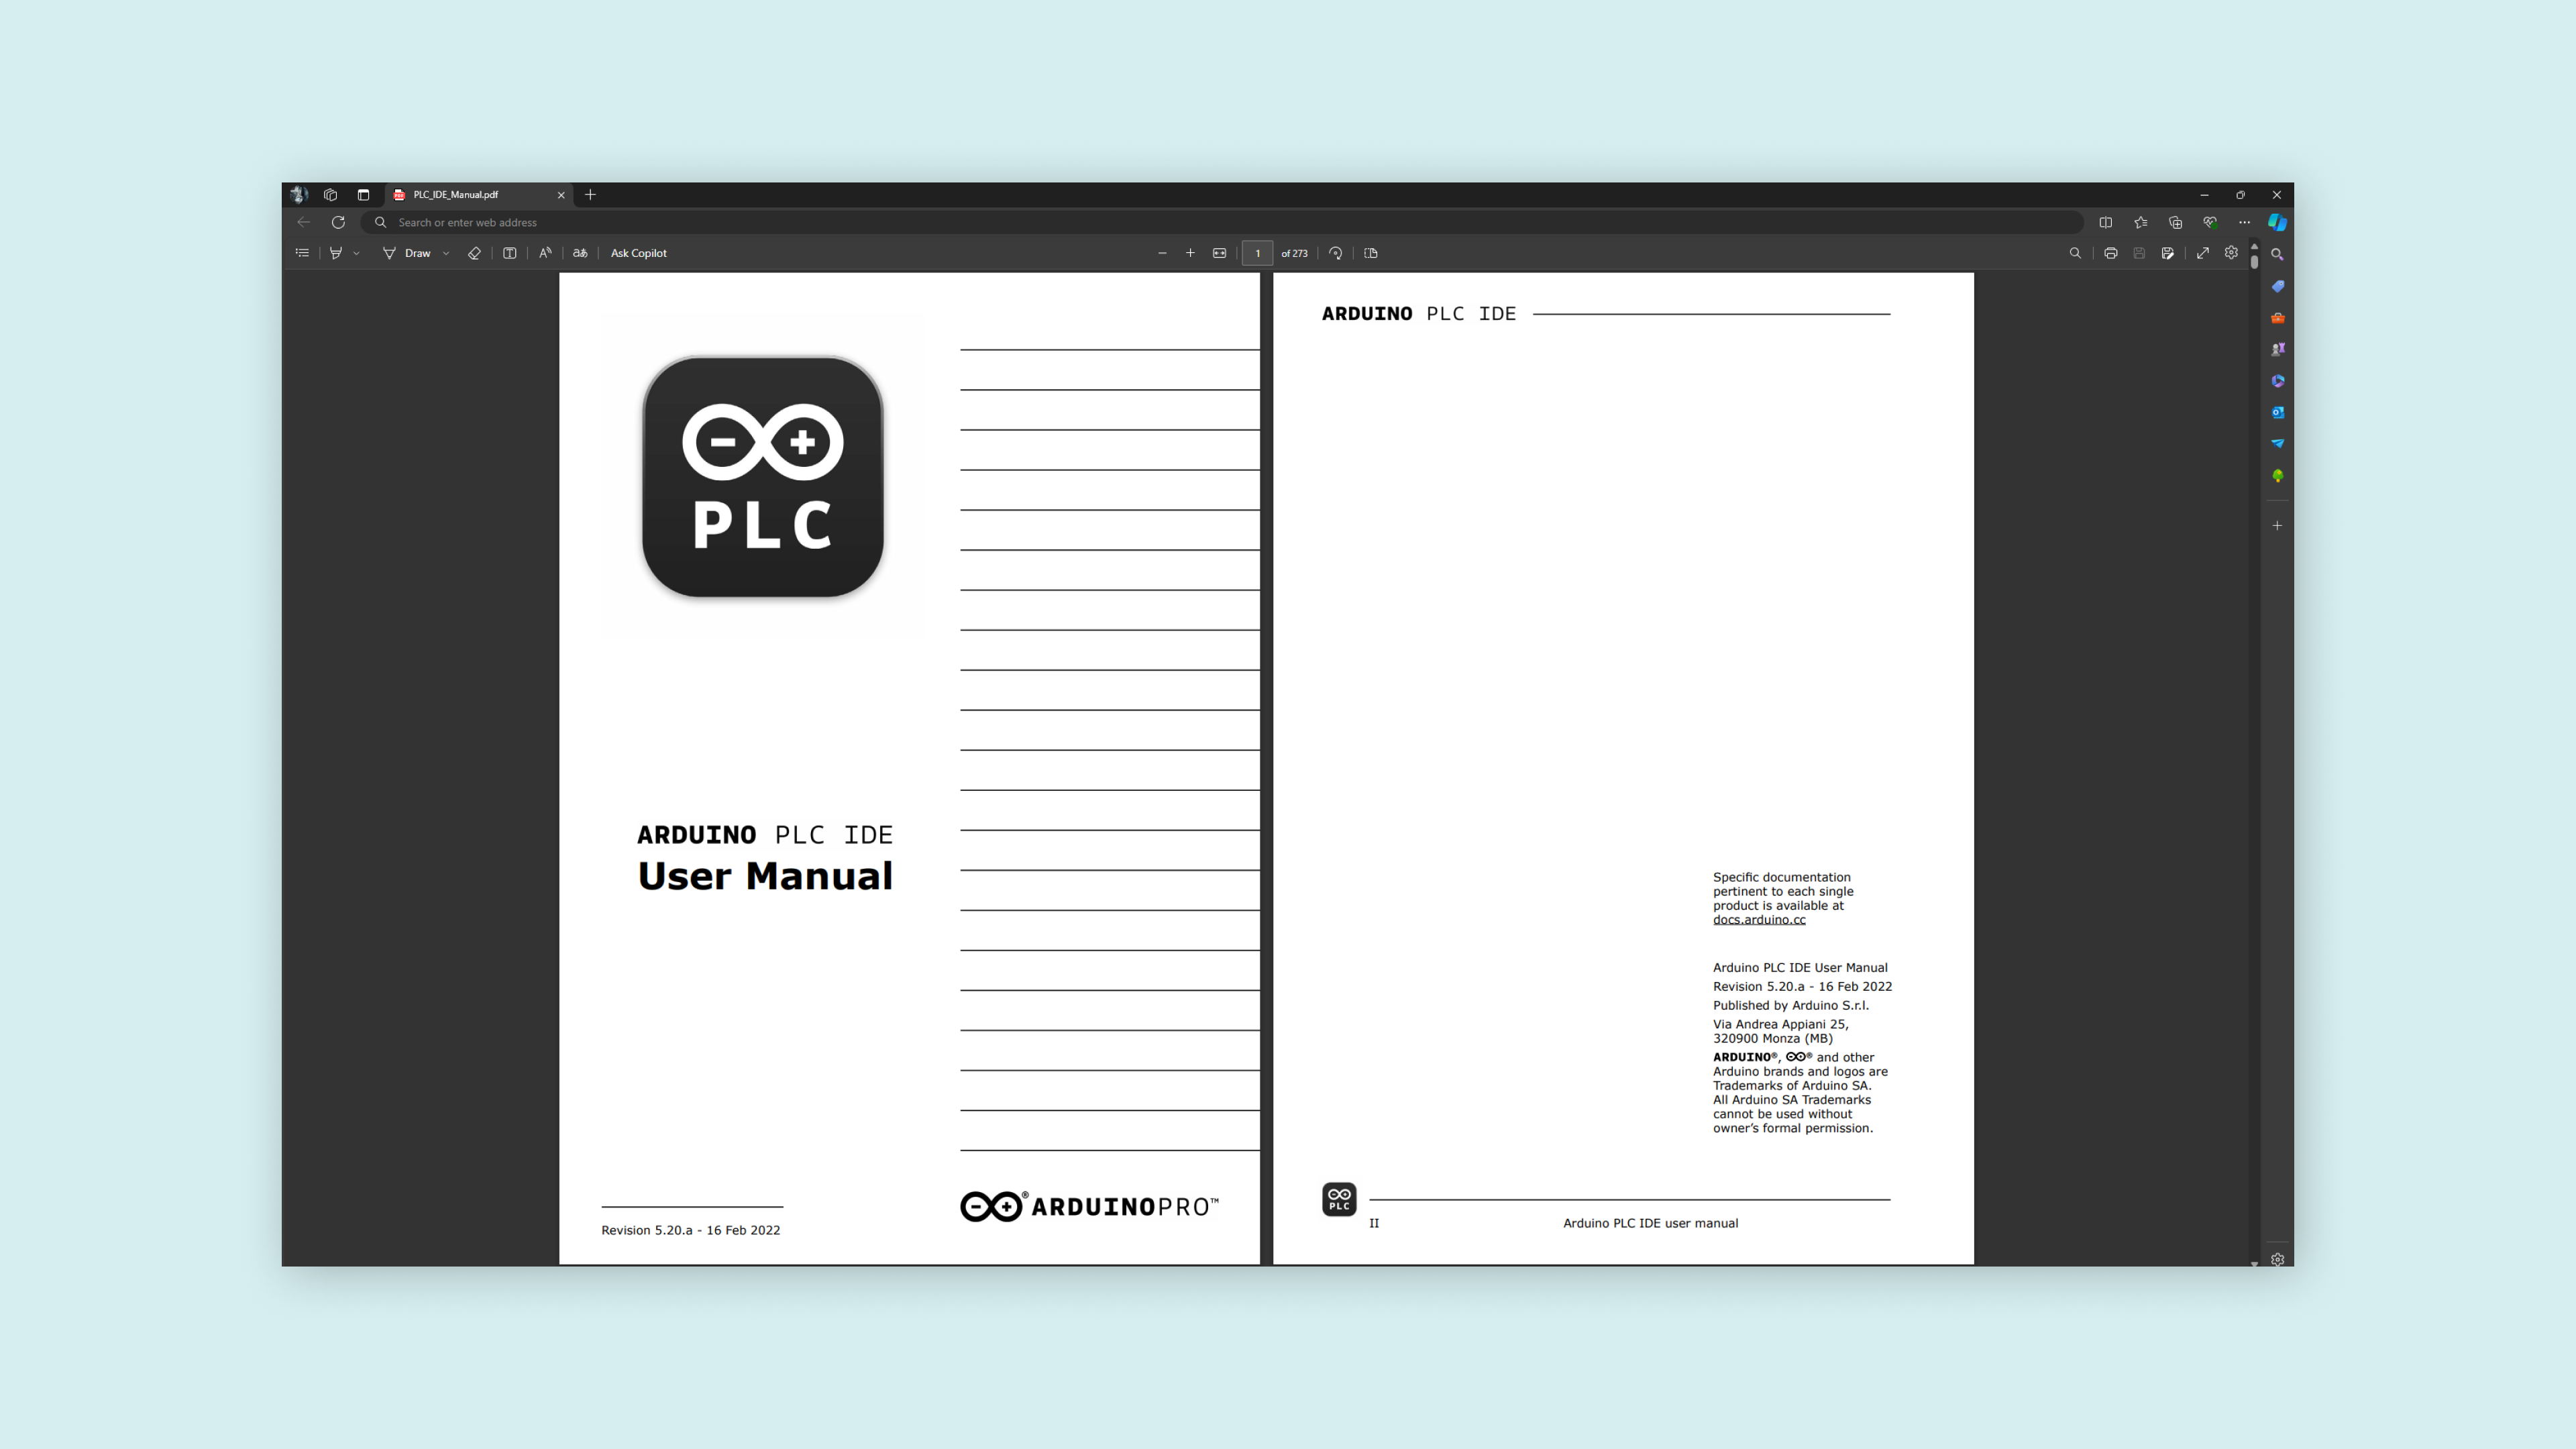 Generated user manual from the Help menu